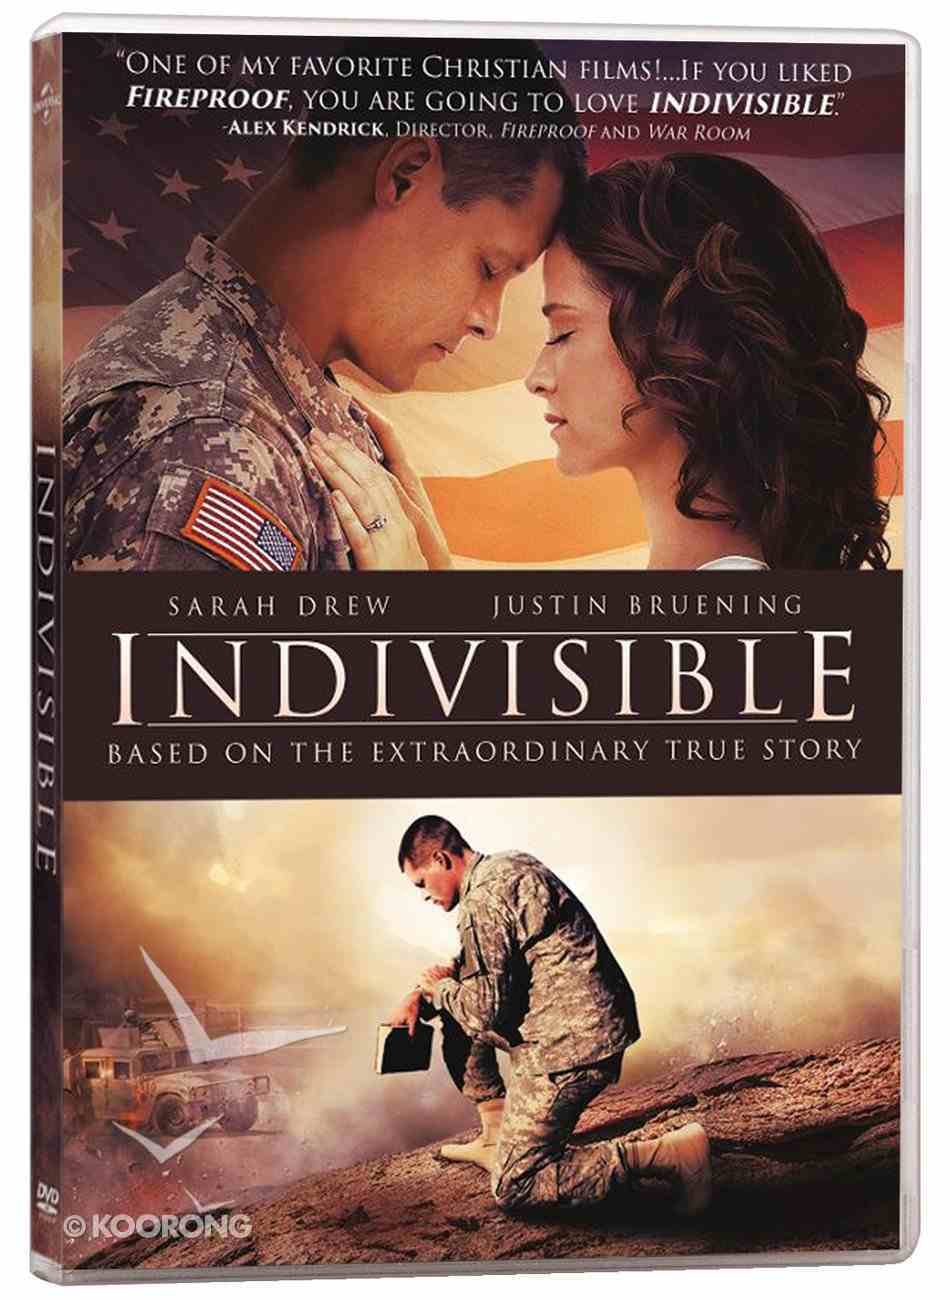 Indivisible DVD